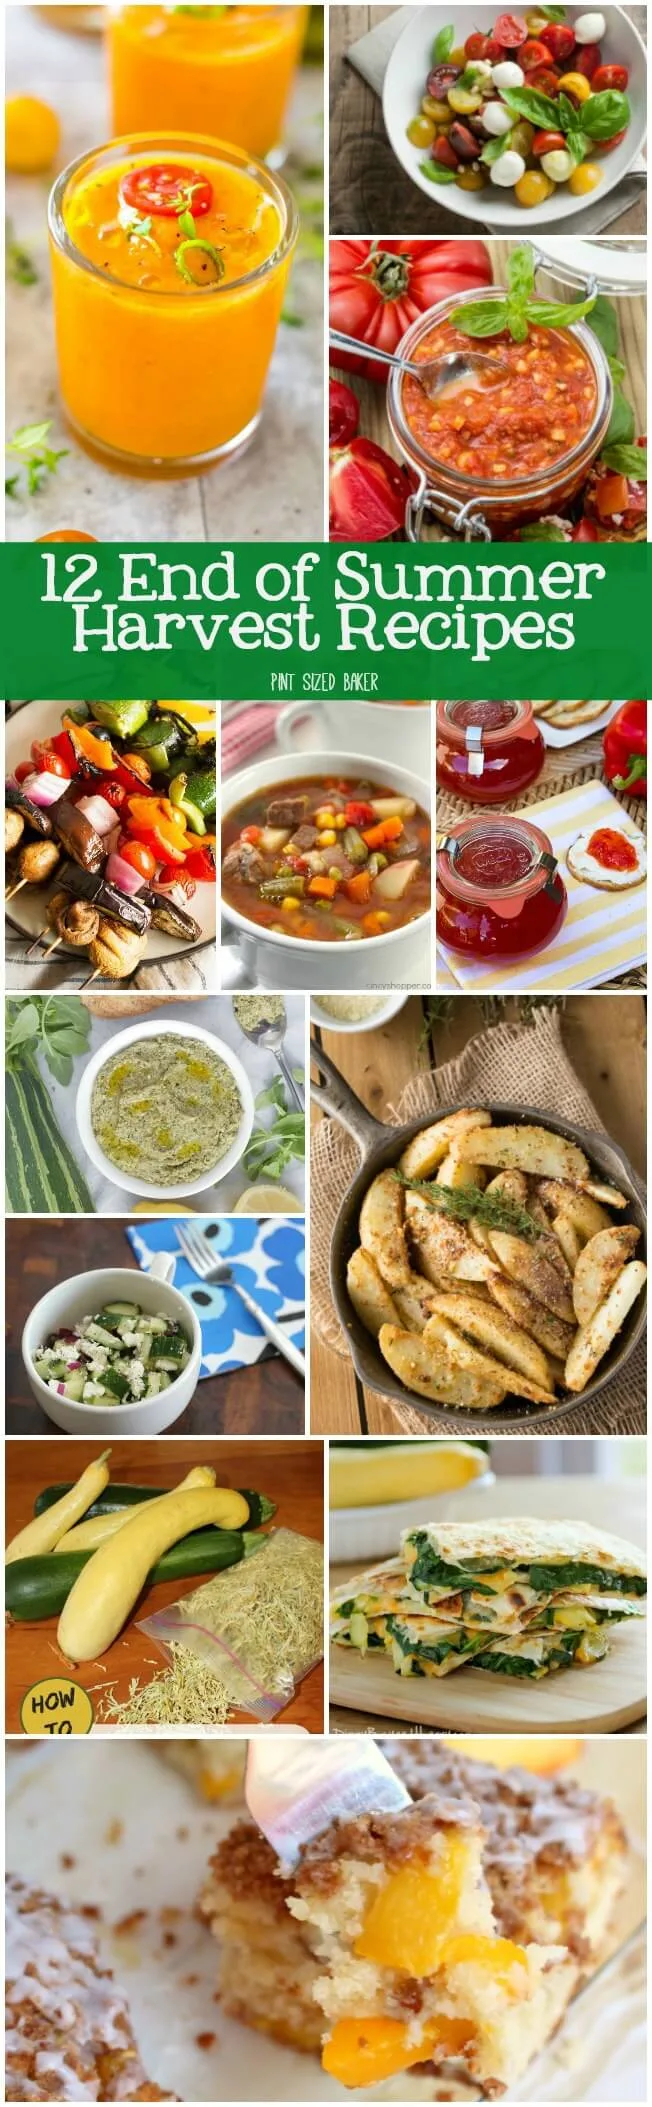 2 End of Summer Harvest Recipes that you can make to use up your tomatoes, zucchini, basil, squash, and more. Get in the kitchen with your seasonal veggies and make a great dish for your hungry family. 